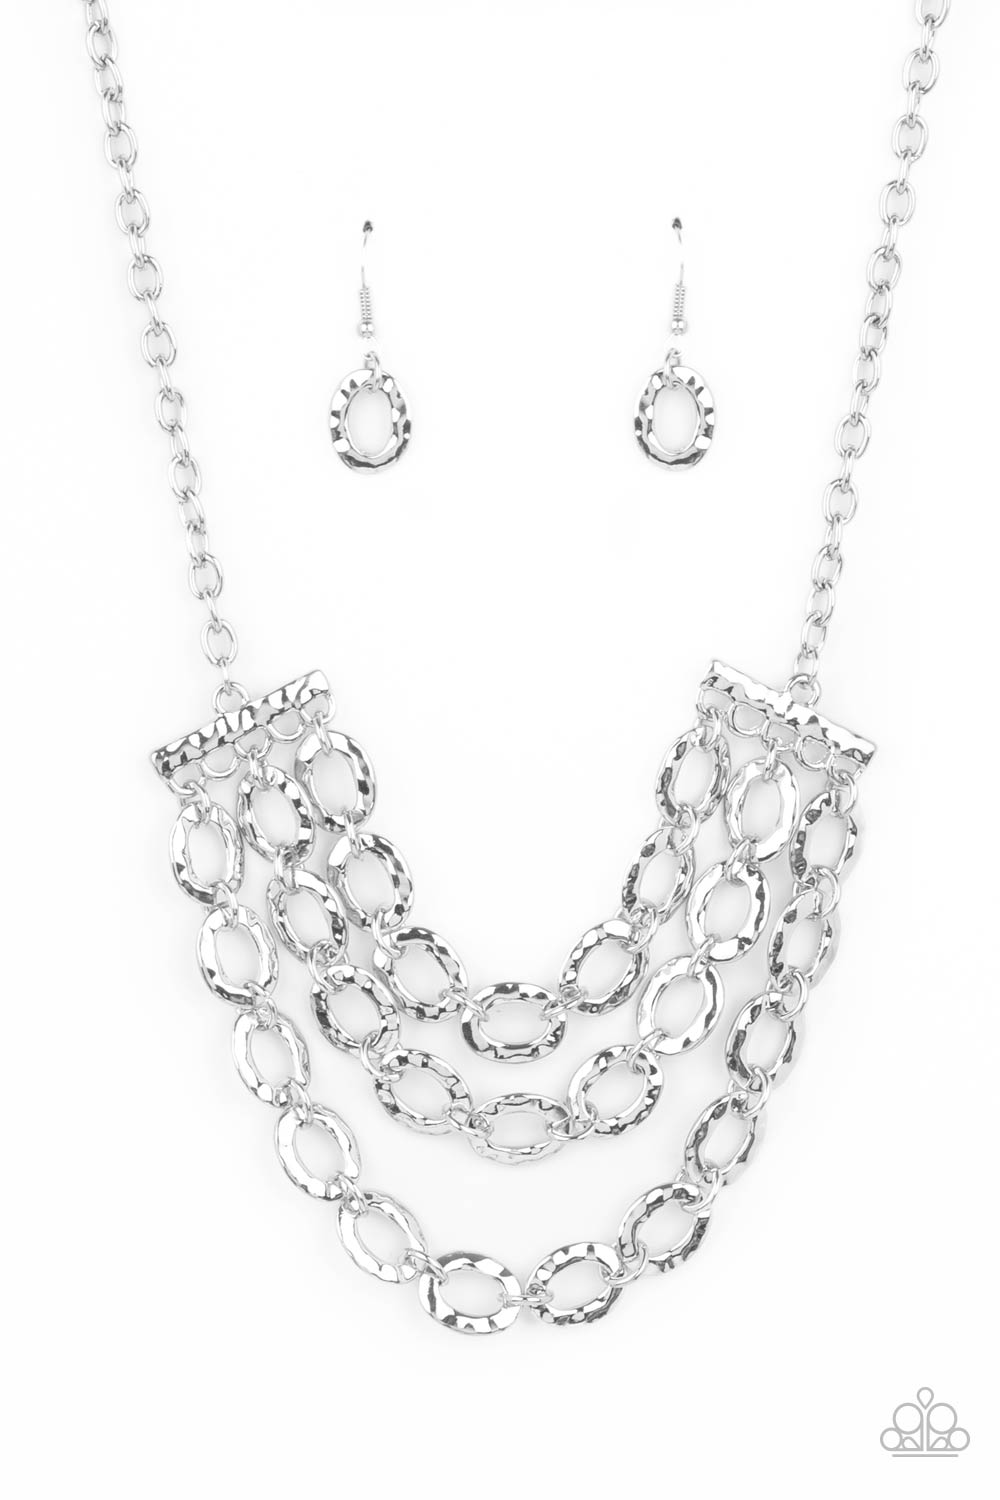 Repeat After Me - Silver Oval Link Necklaces three rows of shiny silver chains with oversized hammered oval links attach to silver bars for an edgy display below the collar. Features an adjustable clasp closure.  Sold as one individual necklace. Includes one pair of matching earrings.  Paparazzi Jewelry is lead and nickel free so it's perfect for sensitive skin too!